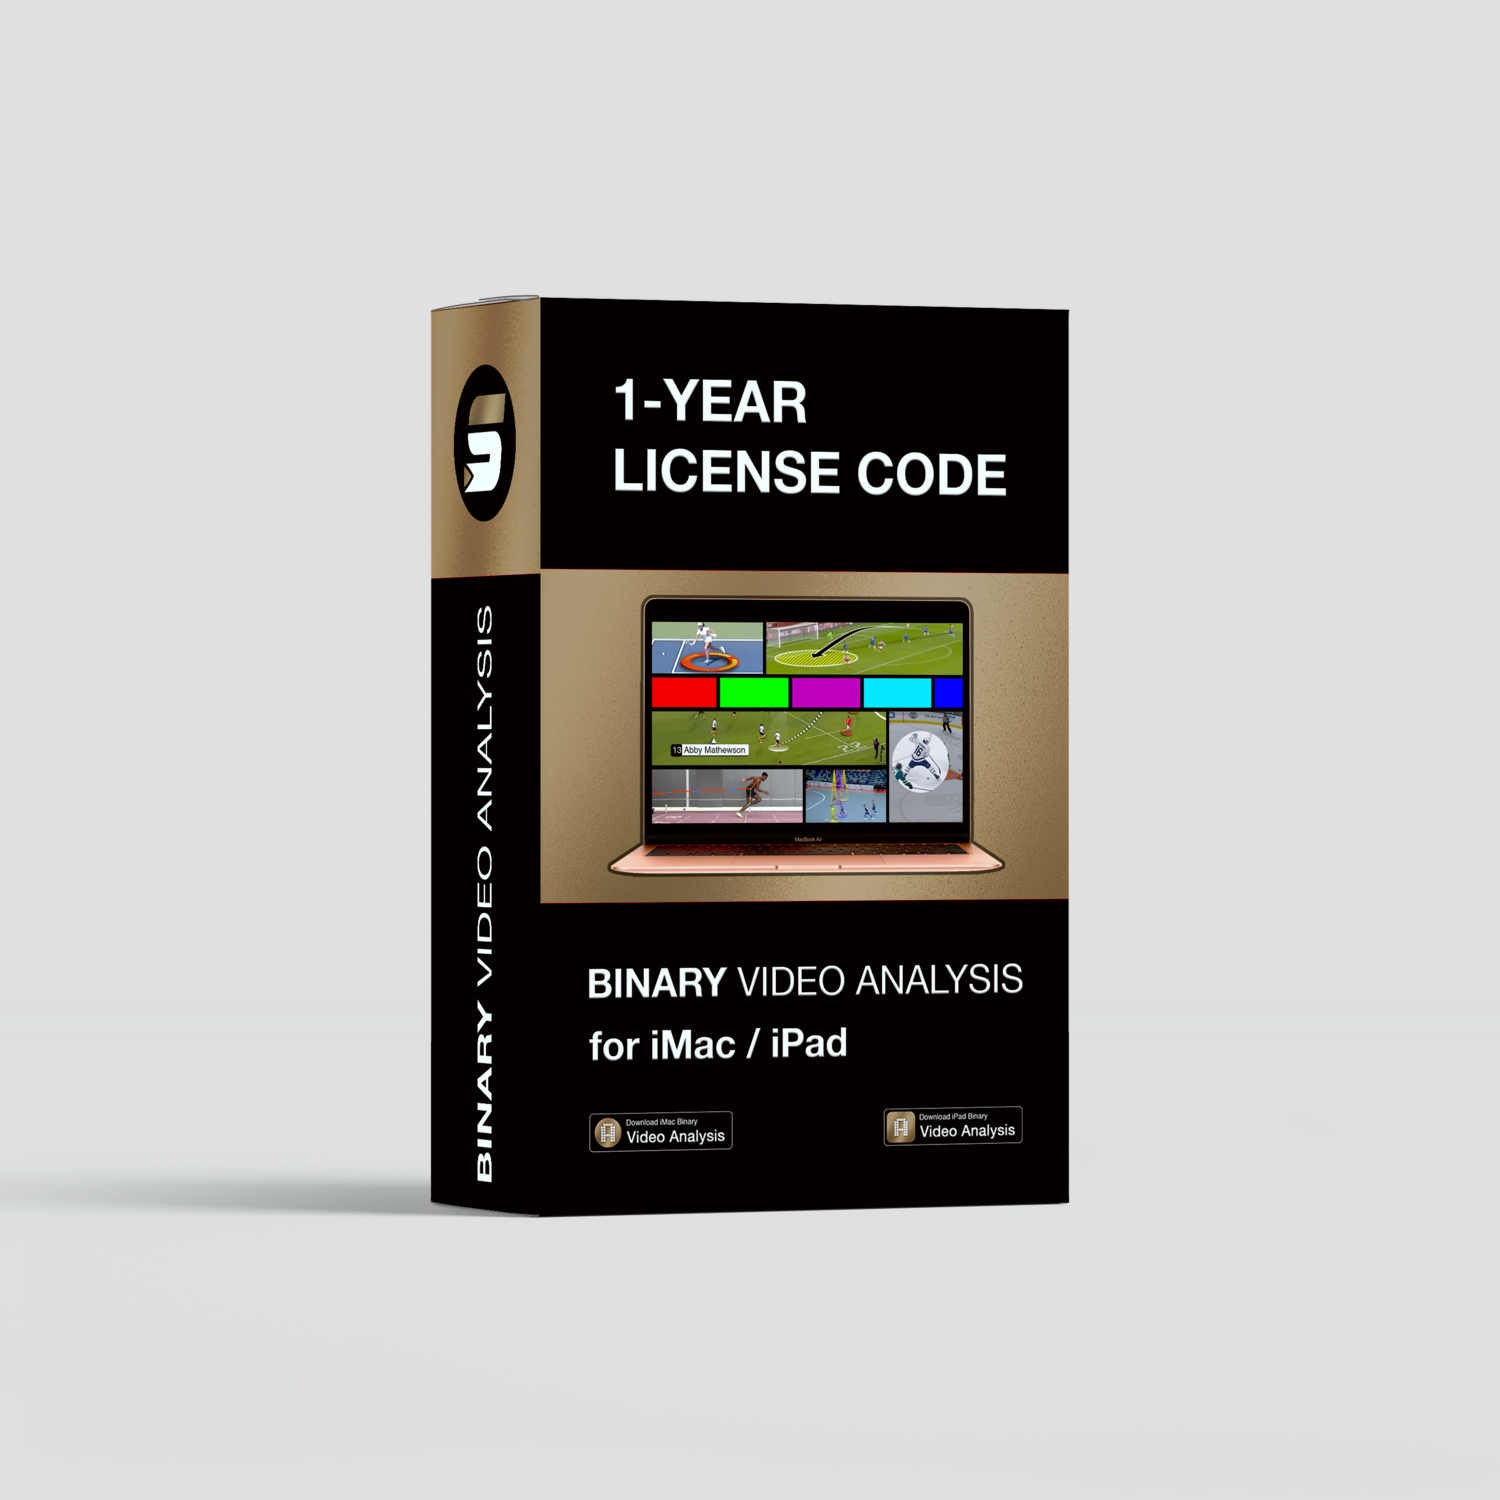 Sports Video Analysis 1-Year License Code for iMac | iPad | iPhone